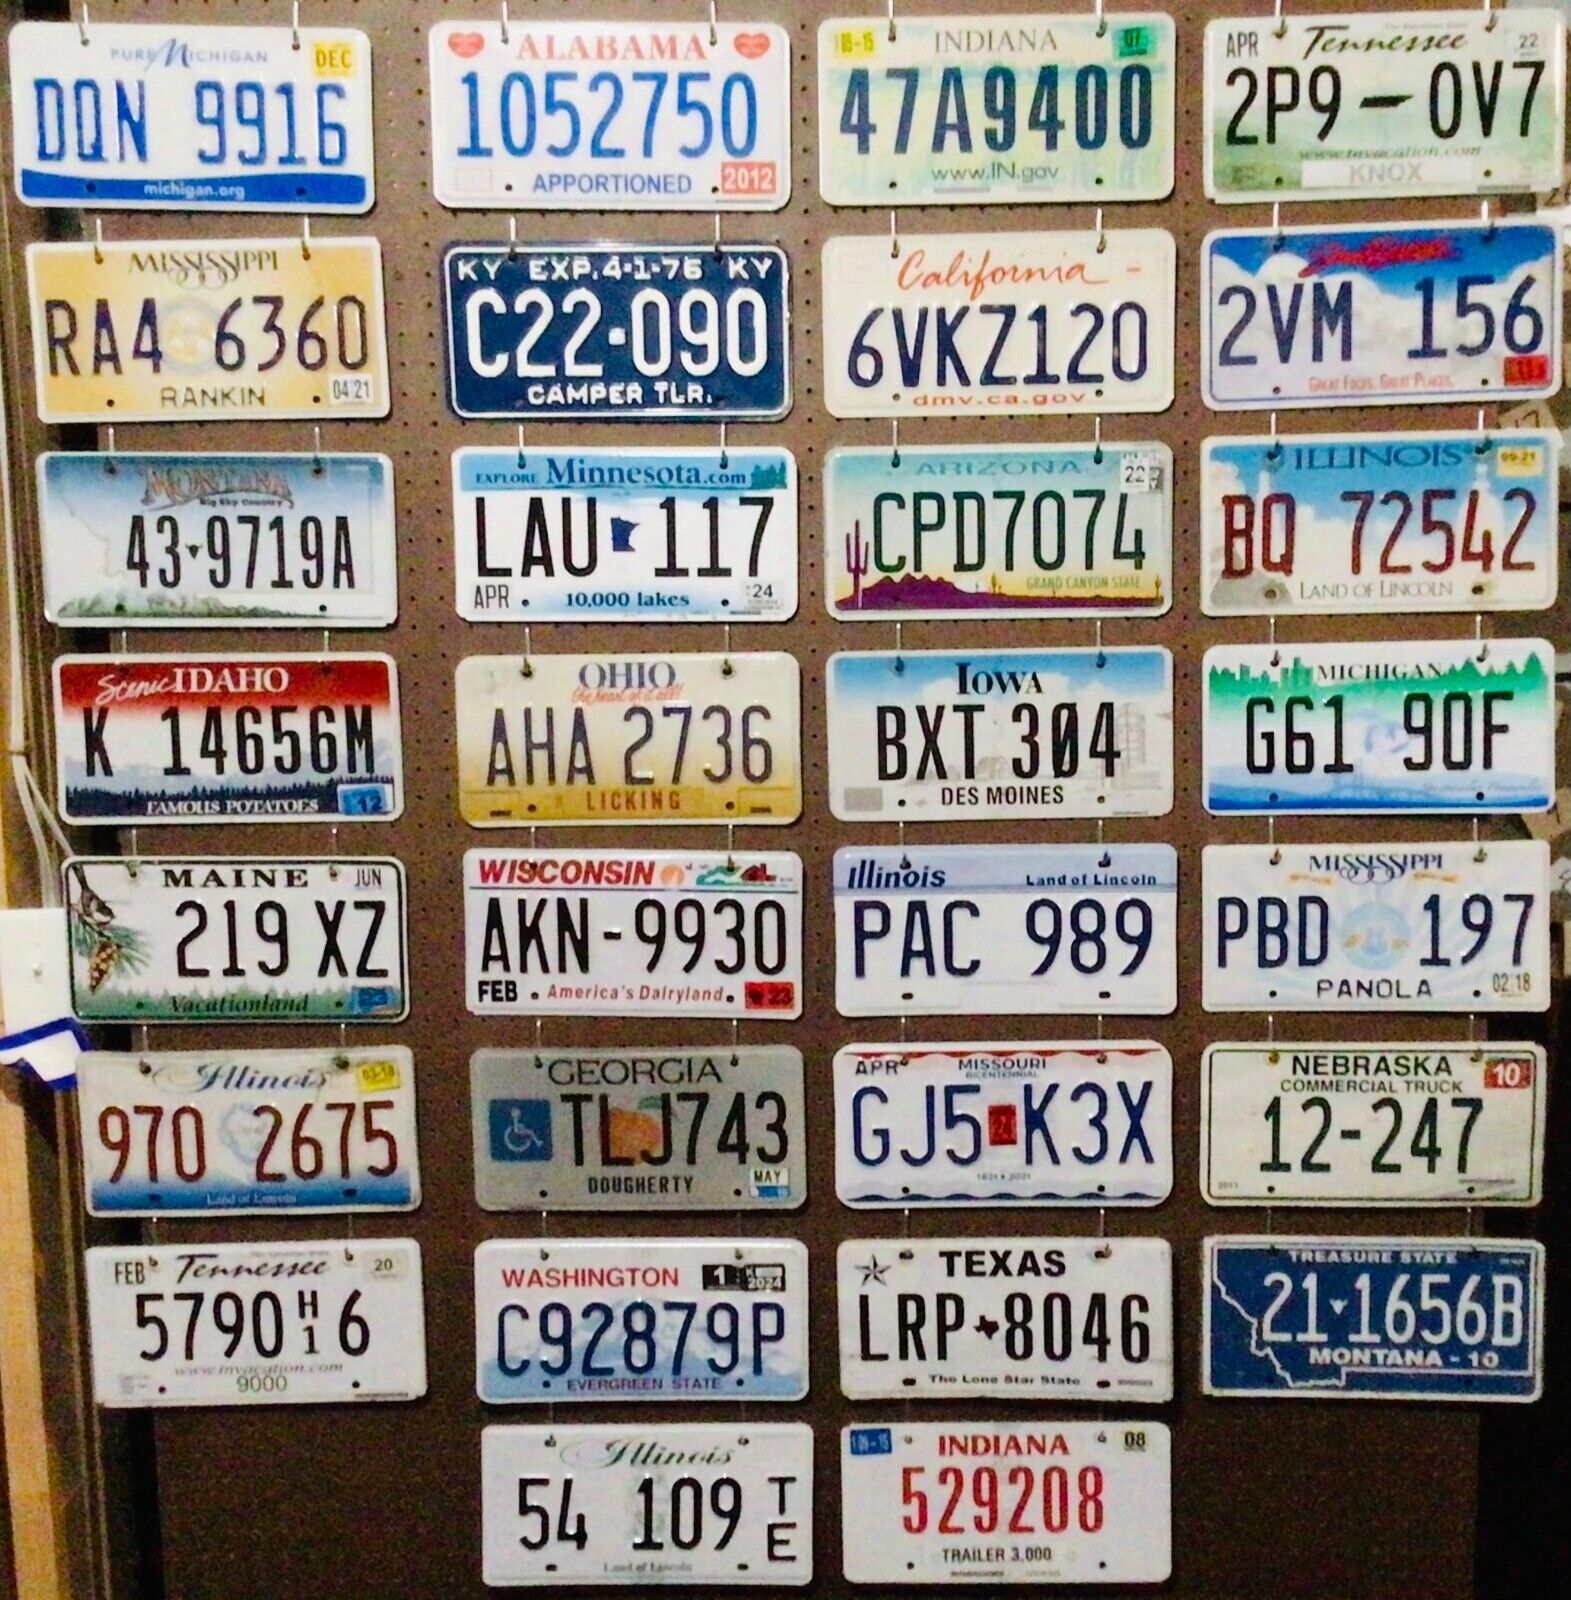 Large lot of 30 old colorful license plates - bulk - many states - low shipping